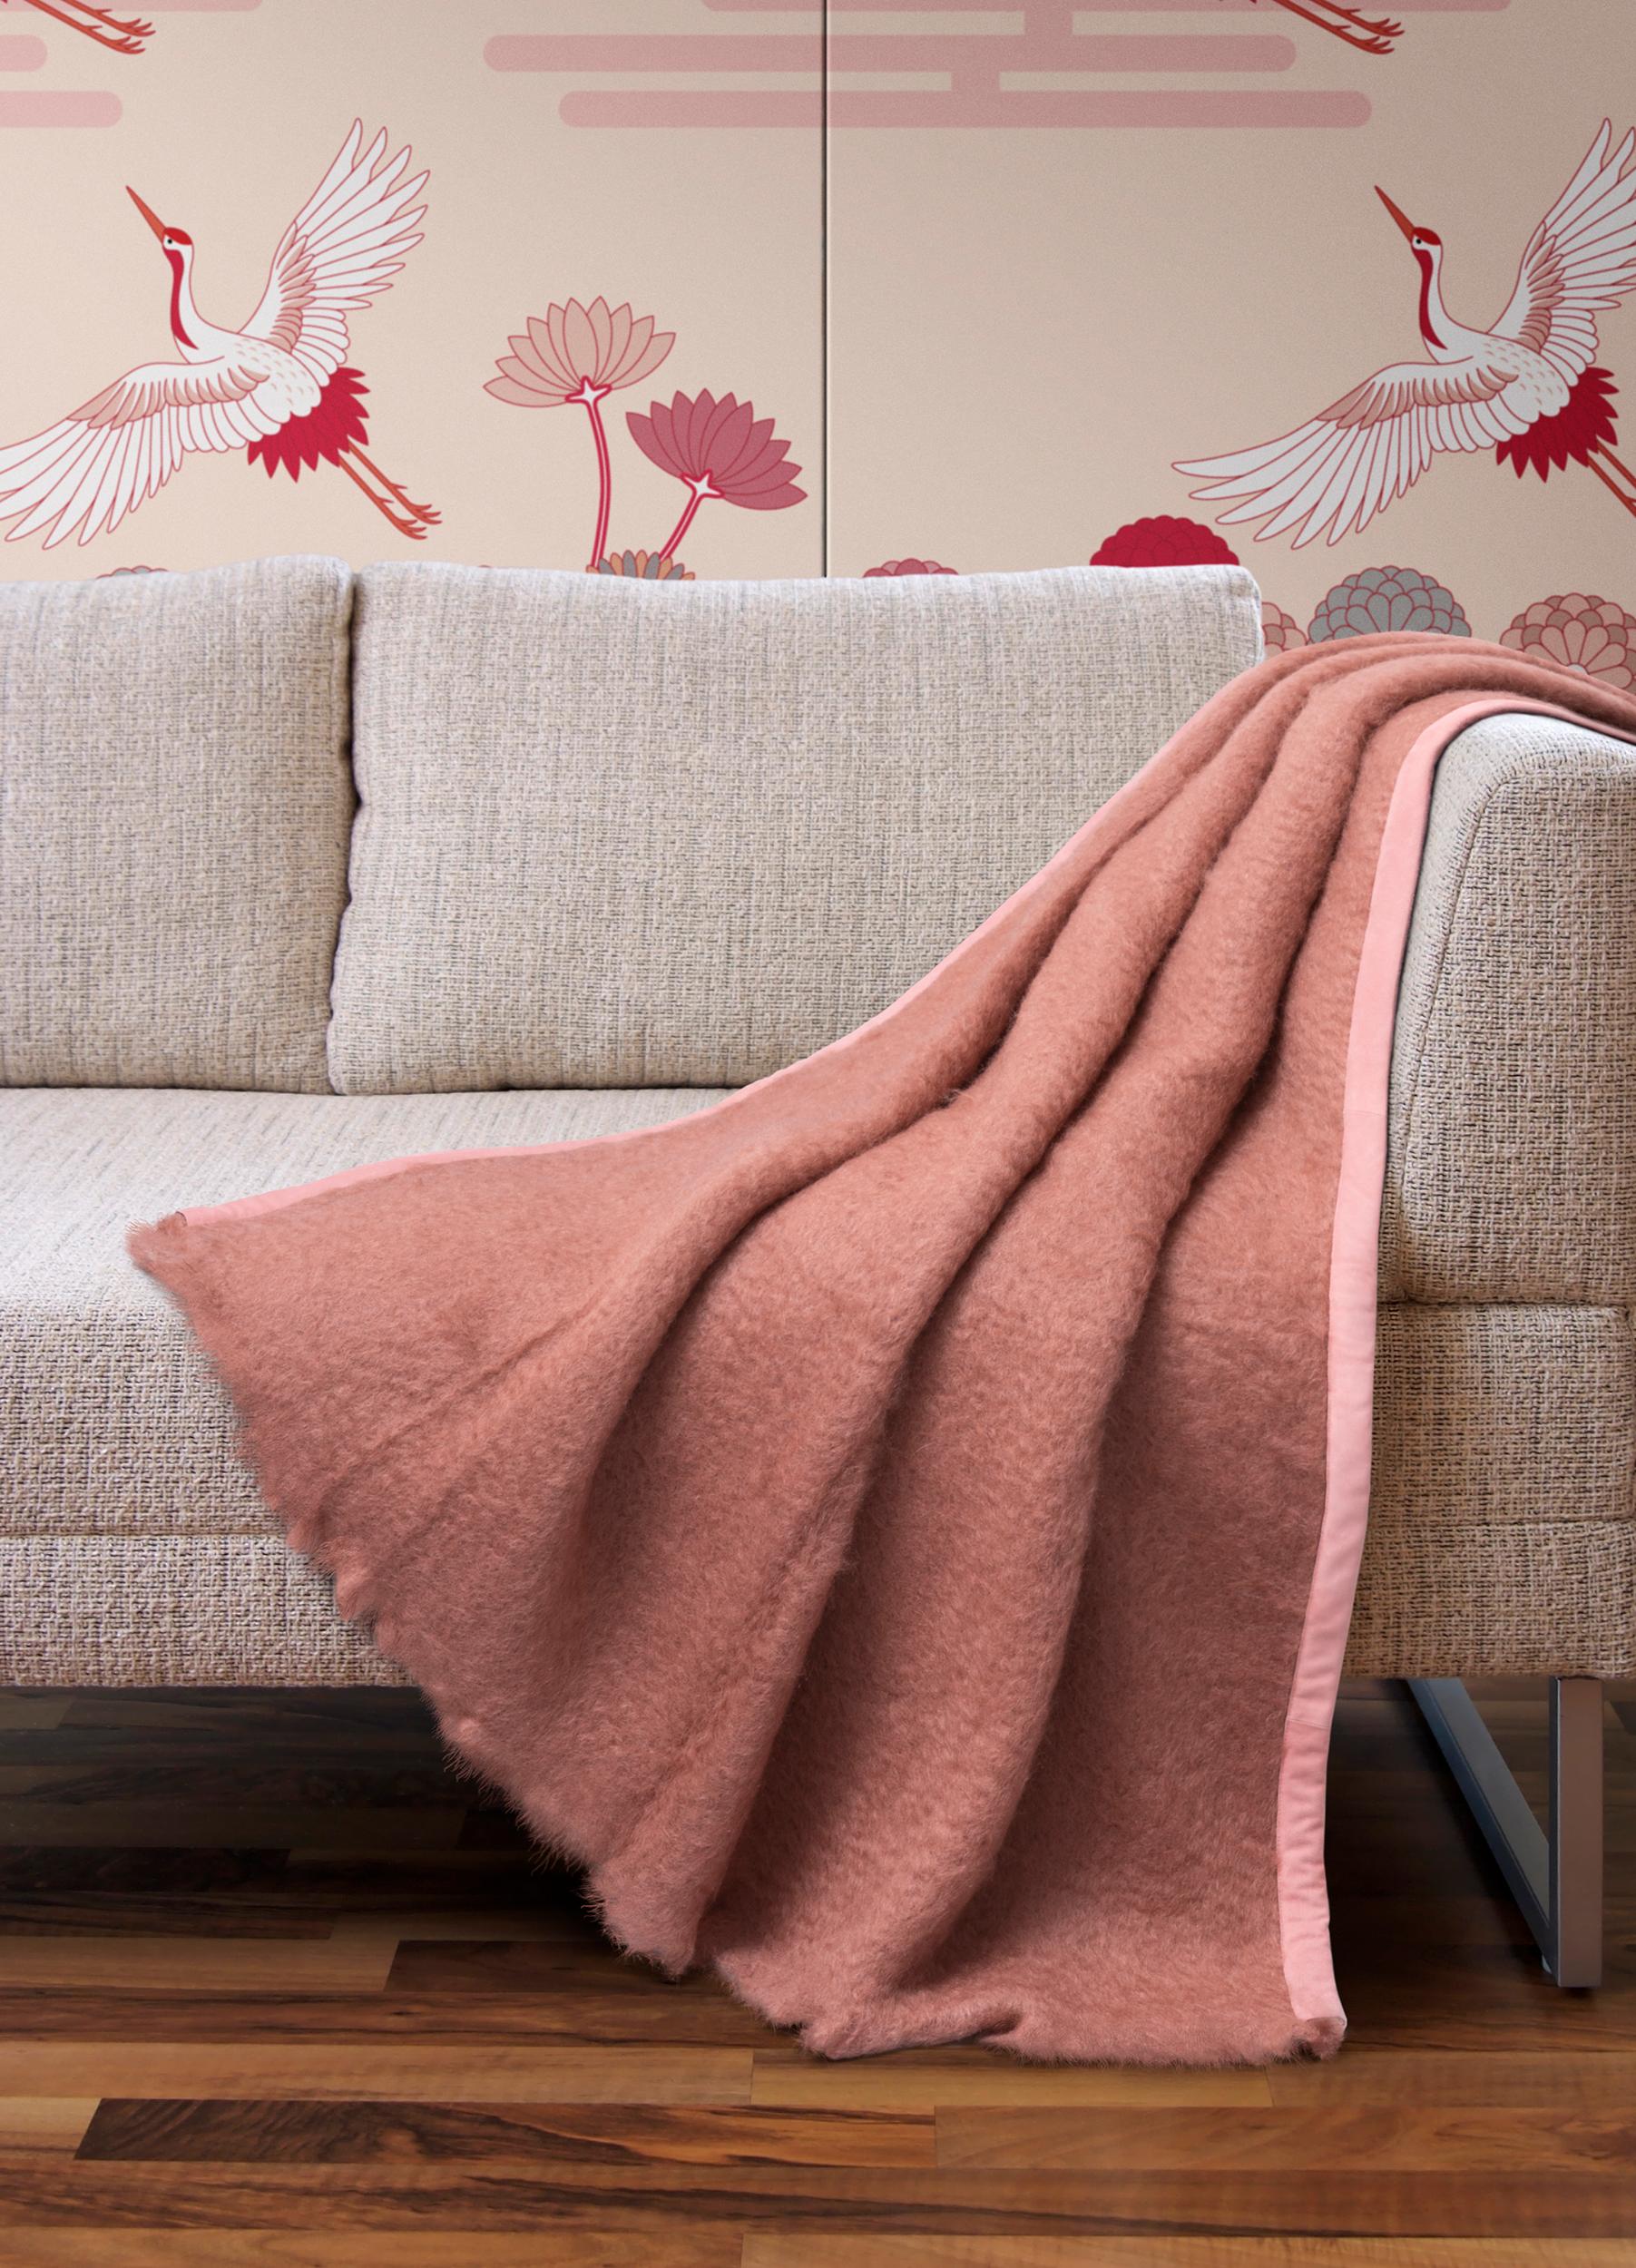 Delicate and elegant, the Capri Mohair Plaid ensures a delicate final touch to any environment. The Capri Mohair Plaid, which comes in pastel pink with cherry blossom pink edges, is naturally soft and warm given its 70% Mohair, 27% Wool, 3%